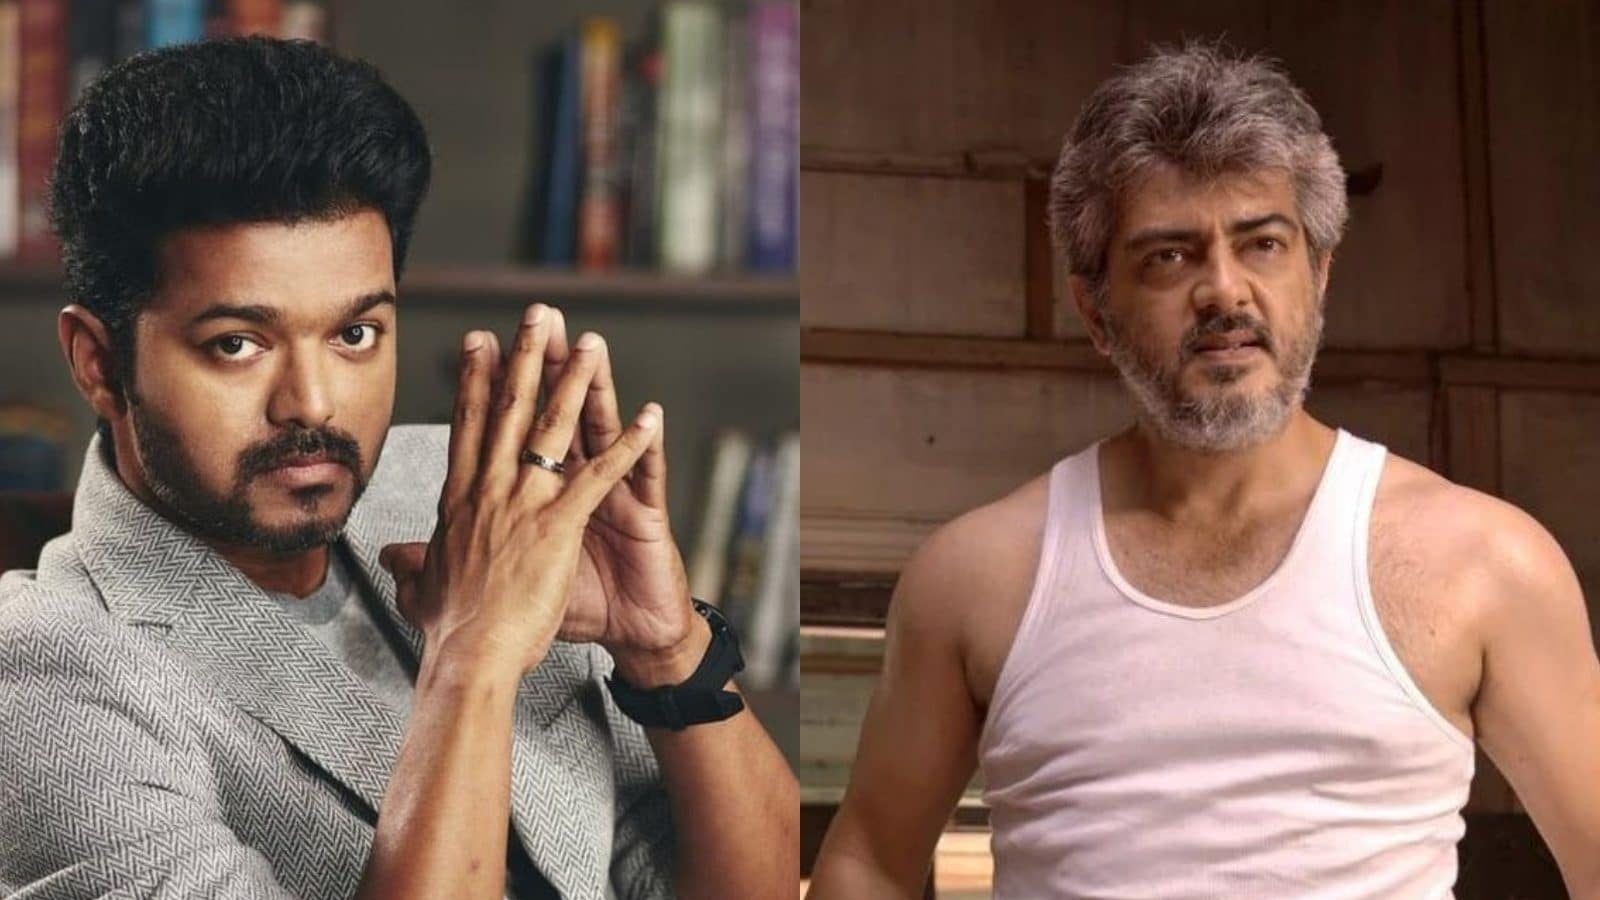 Clash of AK and Thalapathy at the Box Office with ‘Thunivu’ and ‘Varisu’ release; fans cause a ruckus!